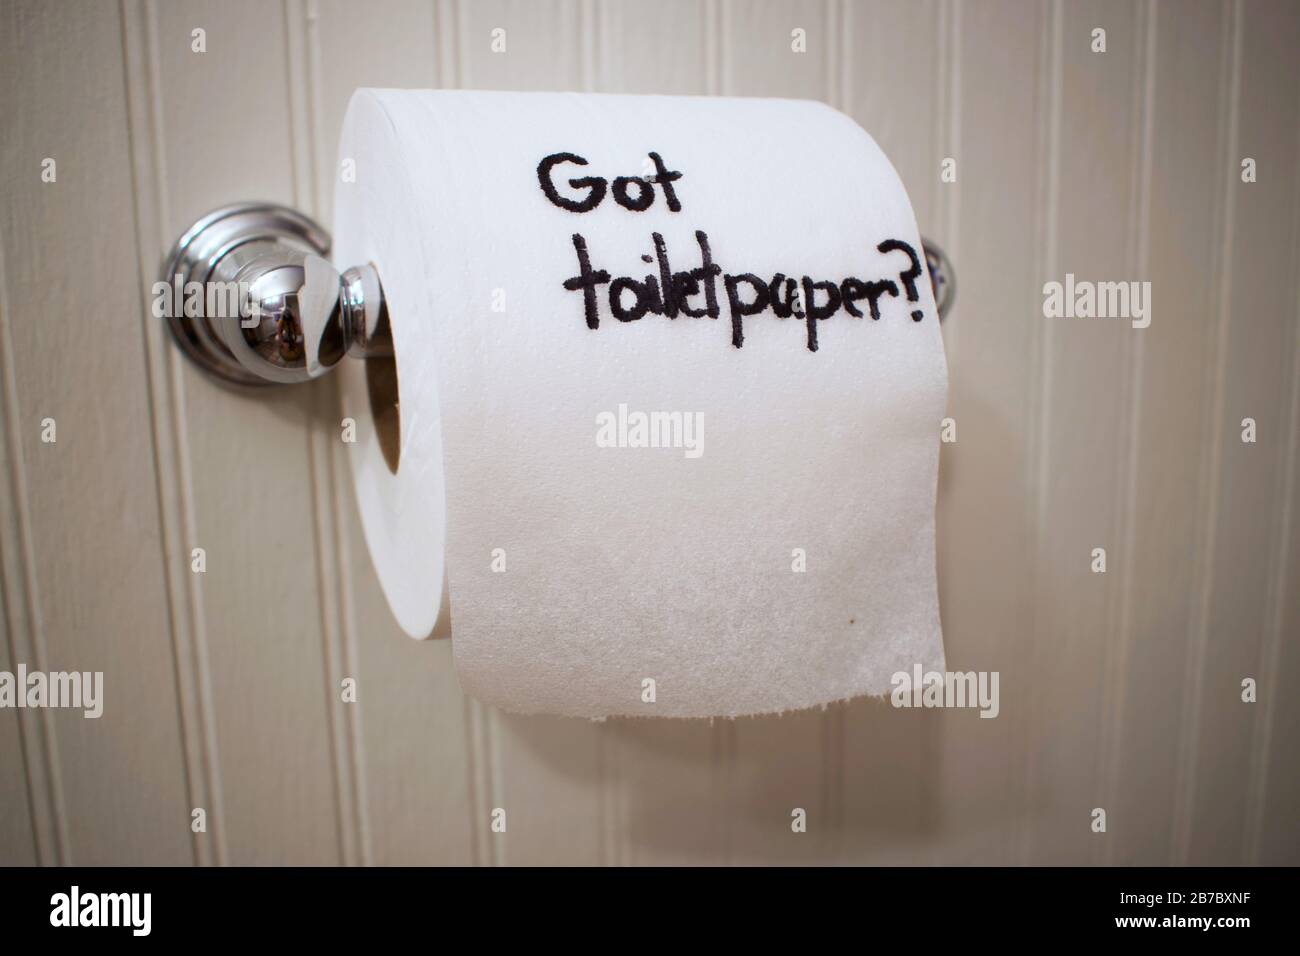 'Got Toilet Paper?' written on toilet paper roll with sharpie as it hangs on the wall on a silver spool. Stock Photo